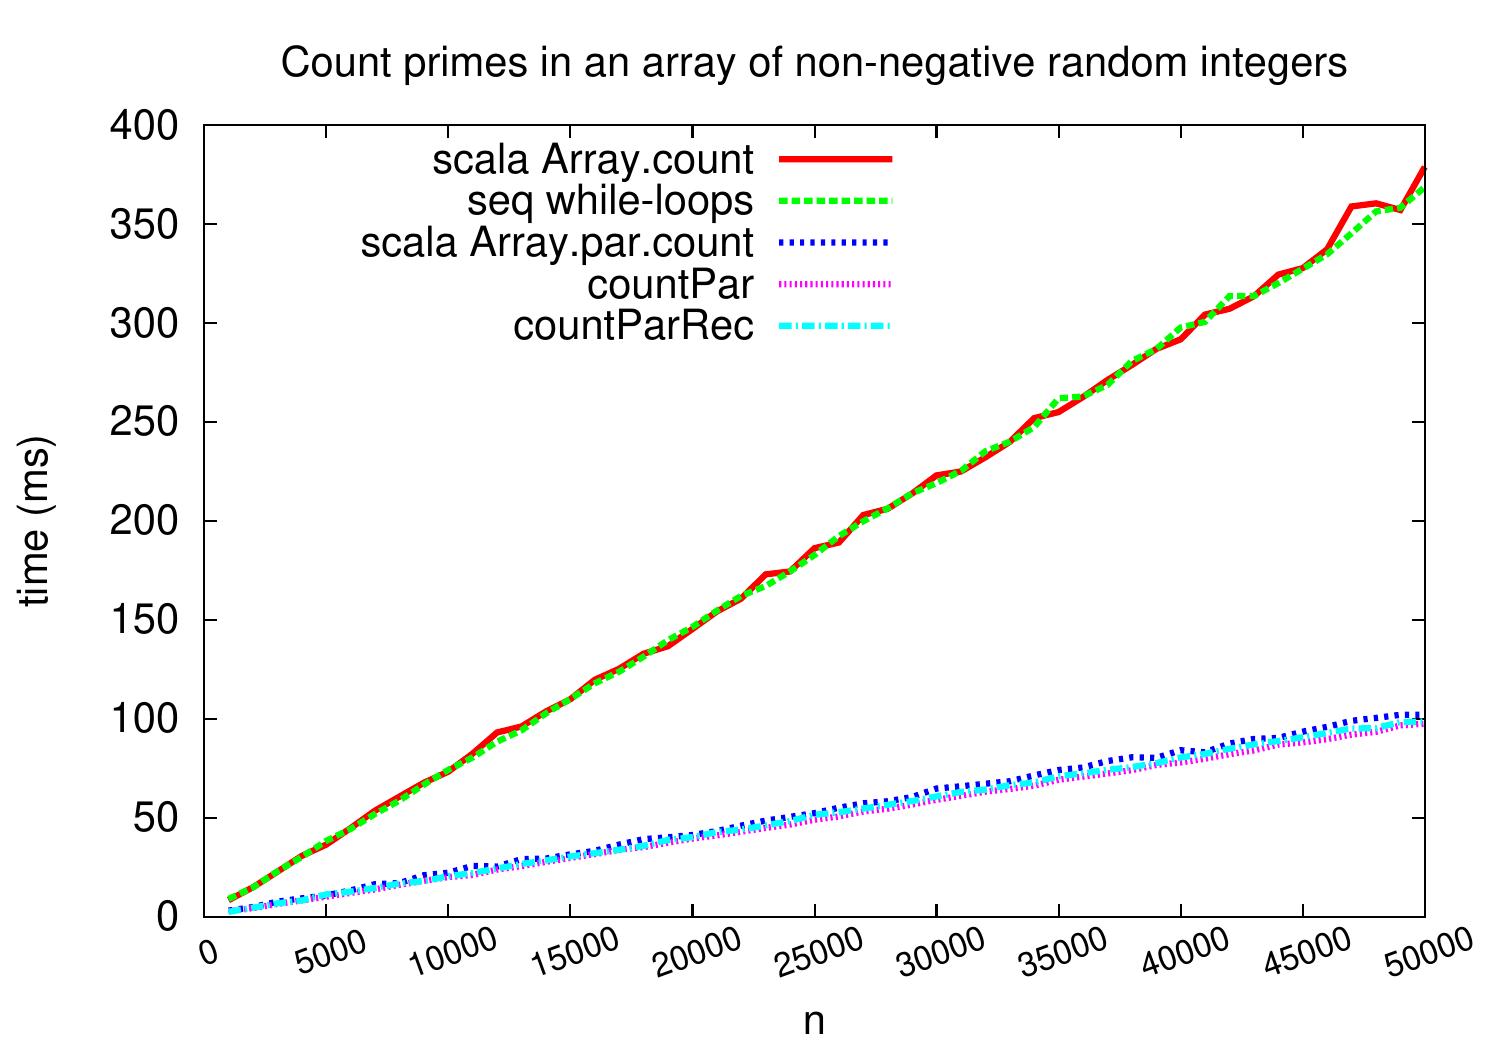 _images/count-primes-2018.jpg